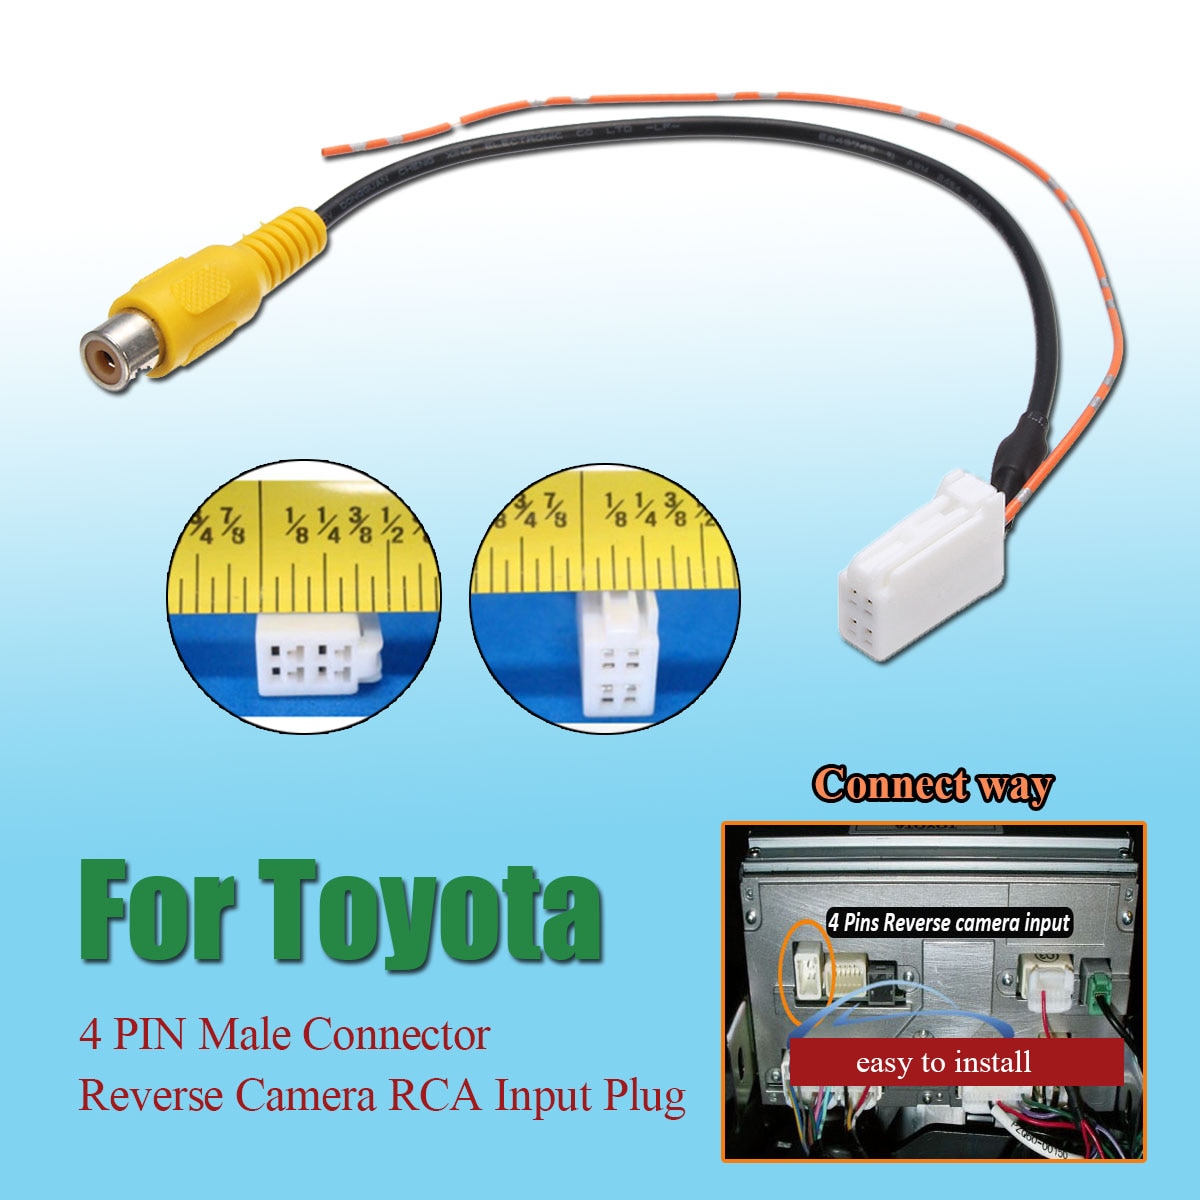 Auto Rca 4 Pin Male Connector Radio Back Up Reverse Auto Achteruitrijcamera Parking Camera Kabel Adapter Rca Input Plug kabel Voor Toyota